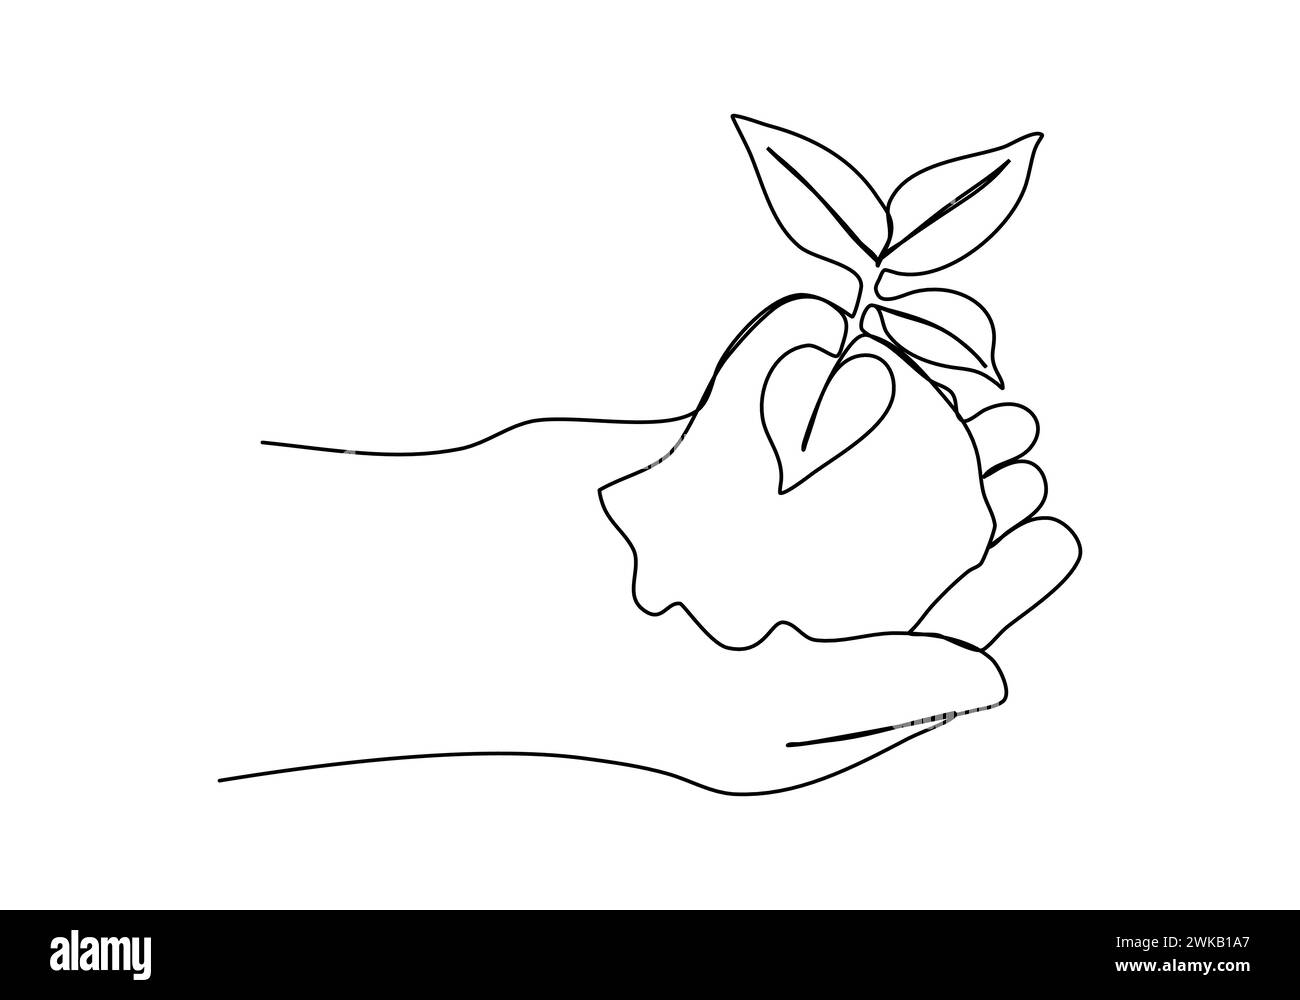 Plant in hands one line drawing vector illustration. Stock Vector